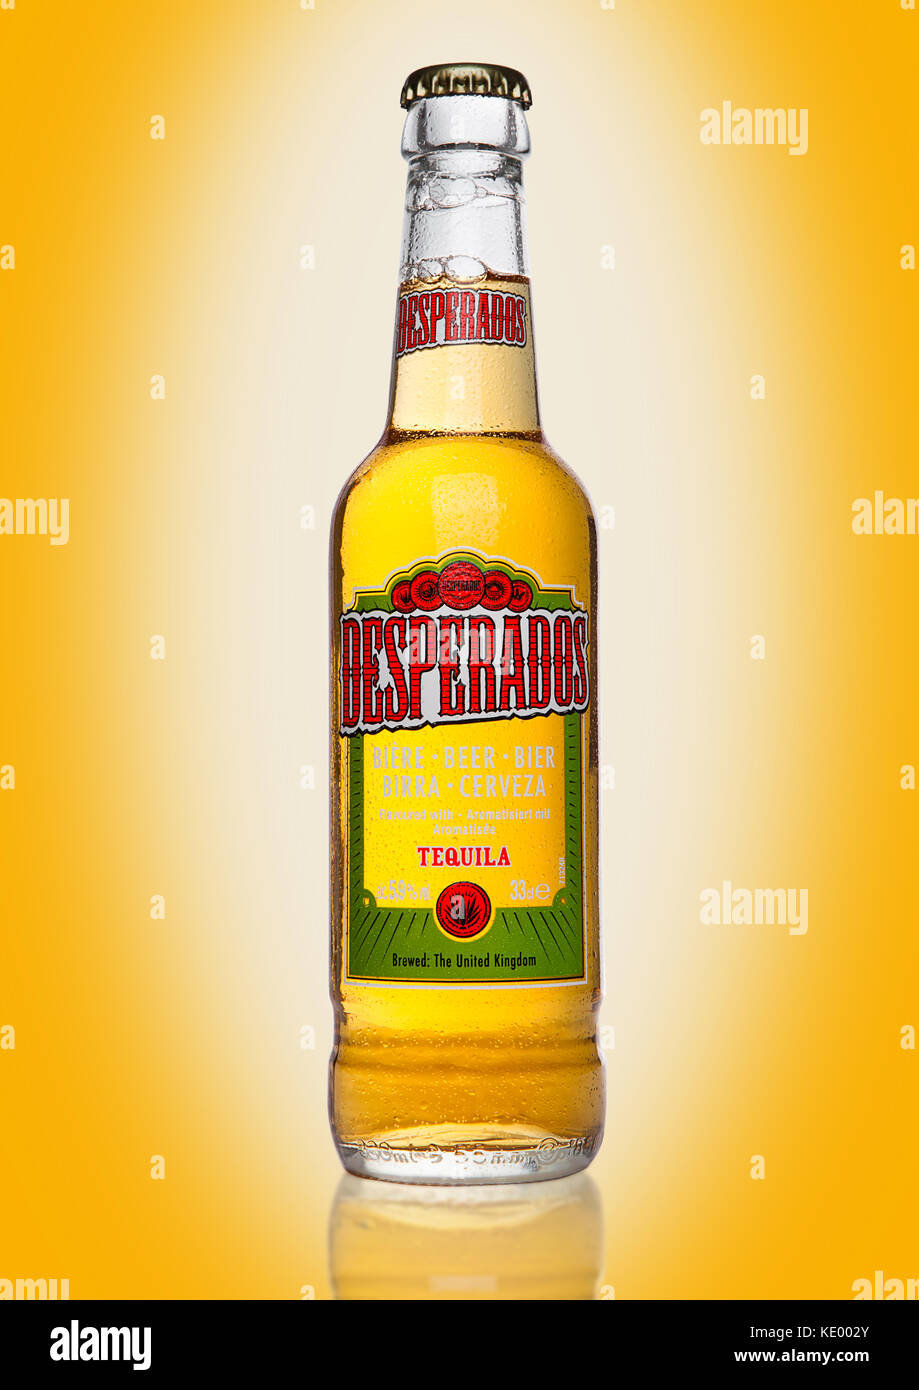 LONDON, UK - JANUARY 02, 2017: Bottle of Desperados beer on yellow background, lager flavored with tequila is a popular beer produced by Heineken and  Stock Photo